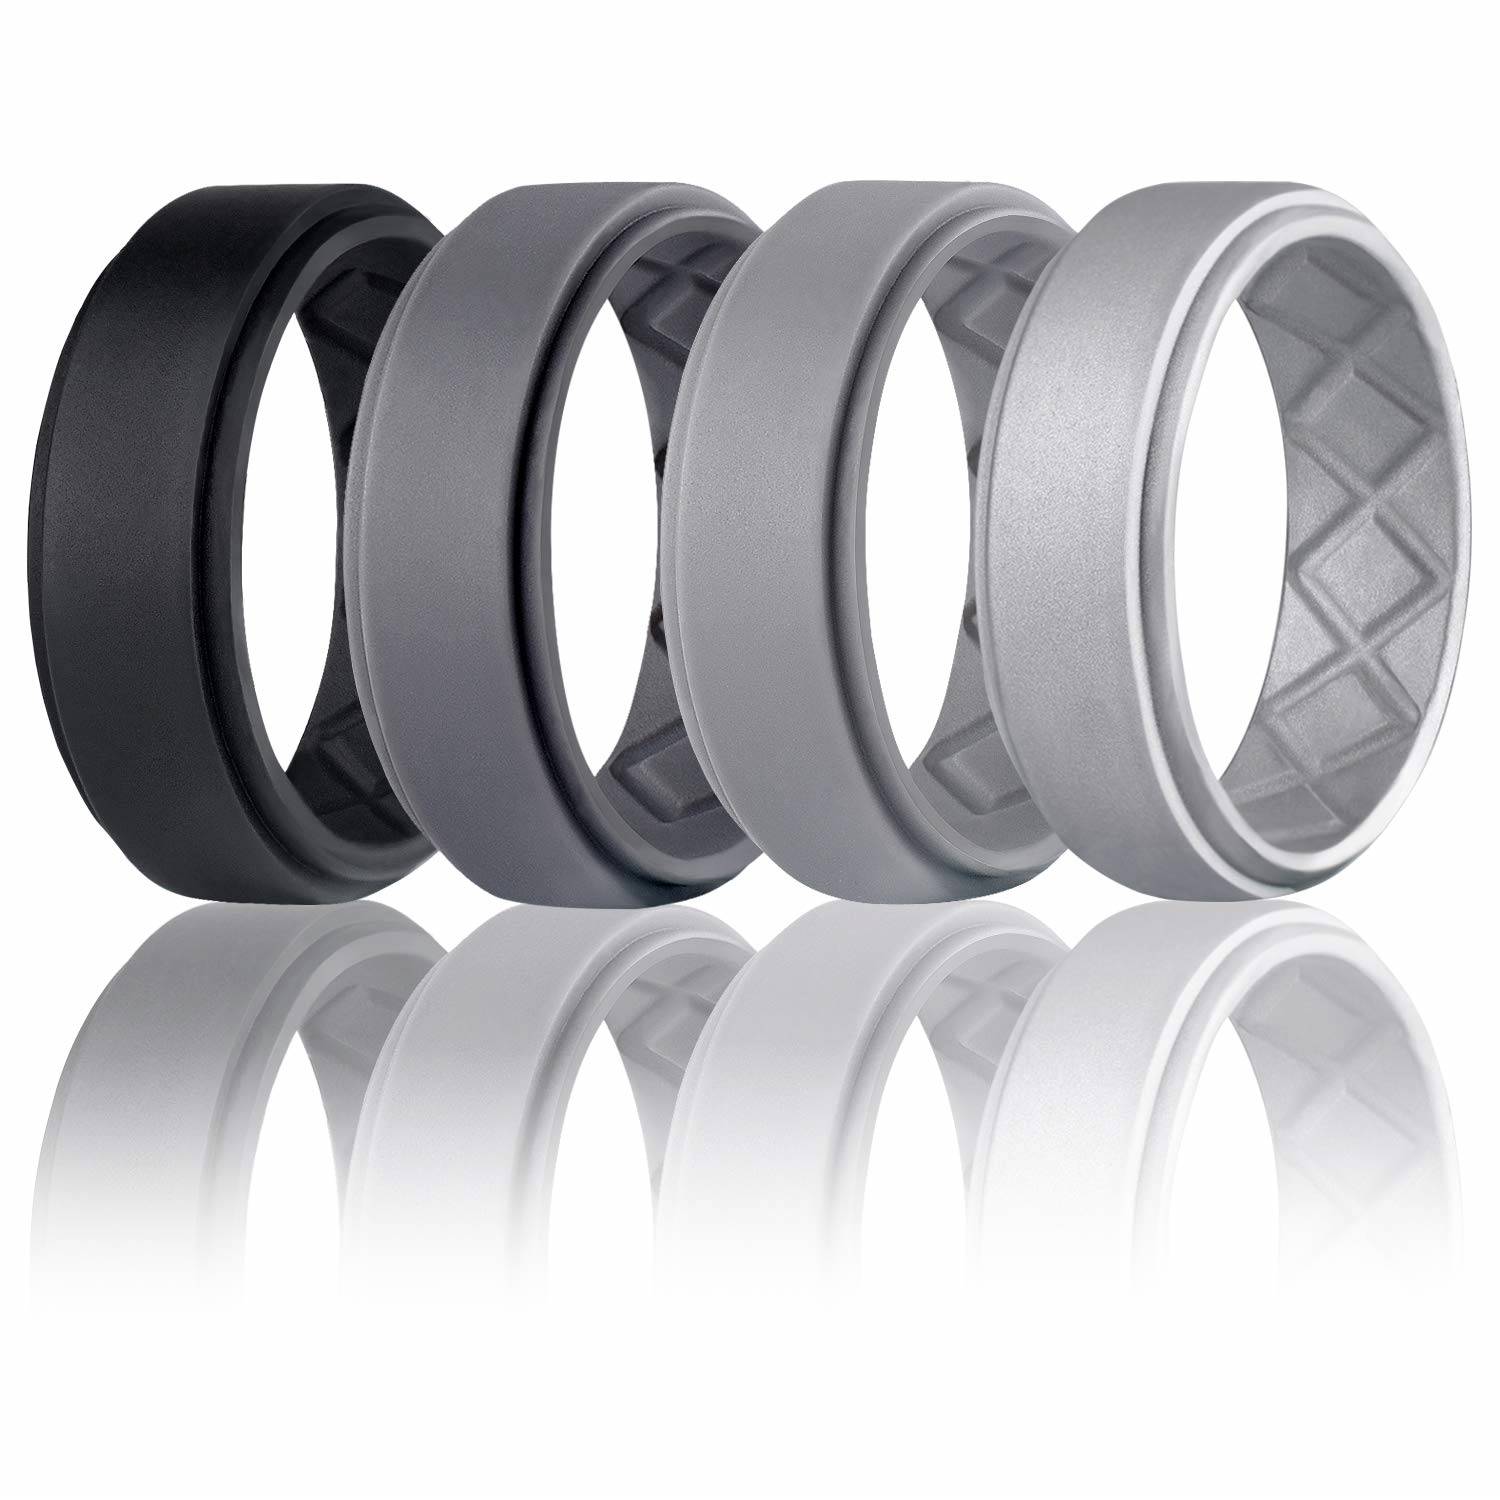 LUNIQI Carved Groove Brushed Surface Design Rubber Bands Silicone Wedding Rings for Men Medical Grade Safe and Durable Alternatives Black Metallic White and Camo Colors 